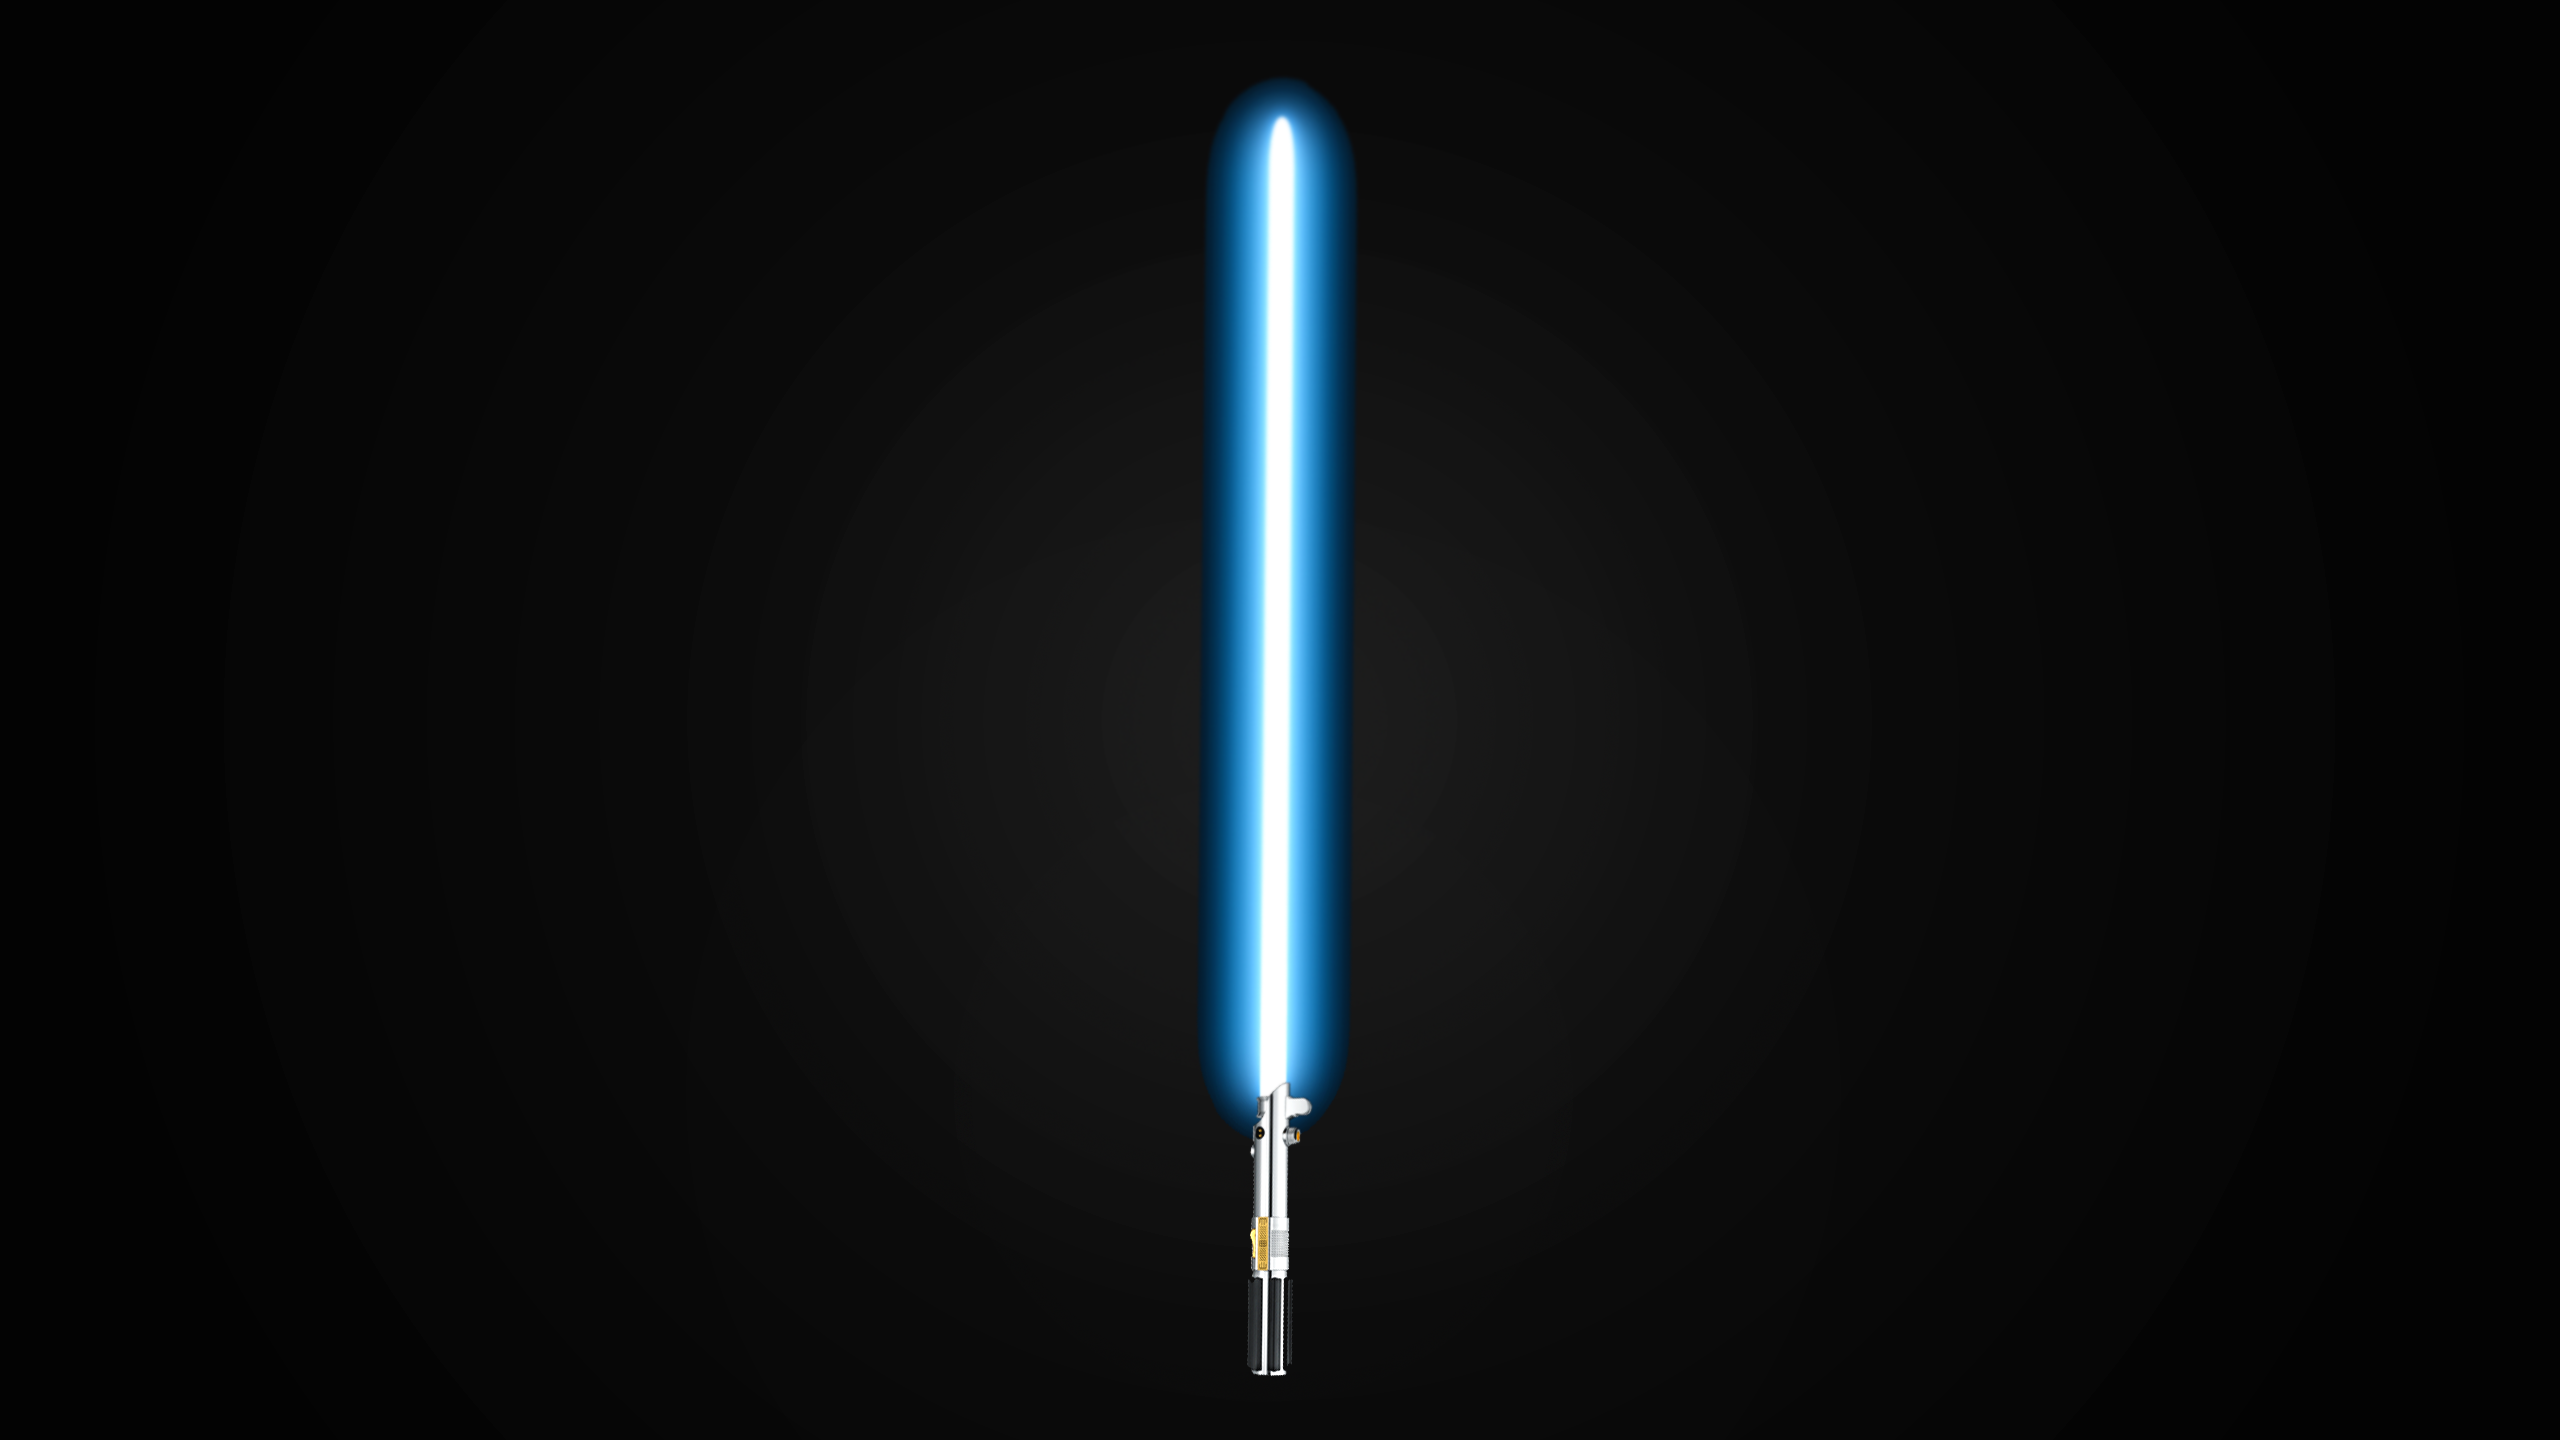 this is a simple but elegant wallpaper with the single lightsaber in 2560x1440